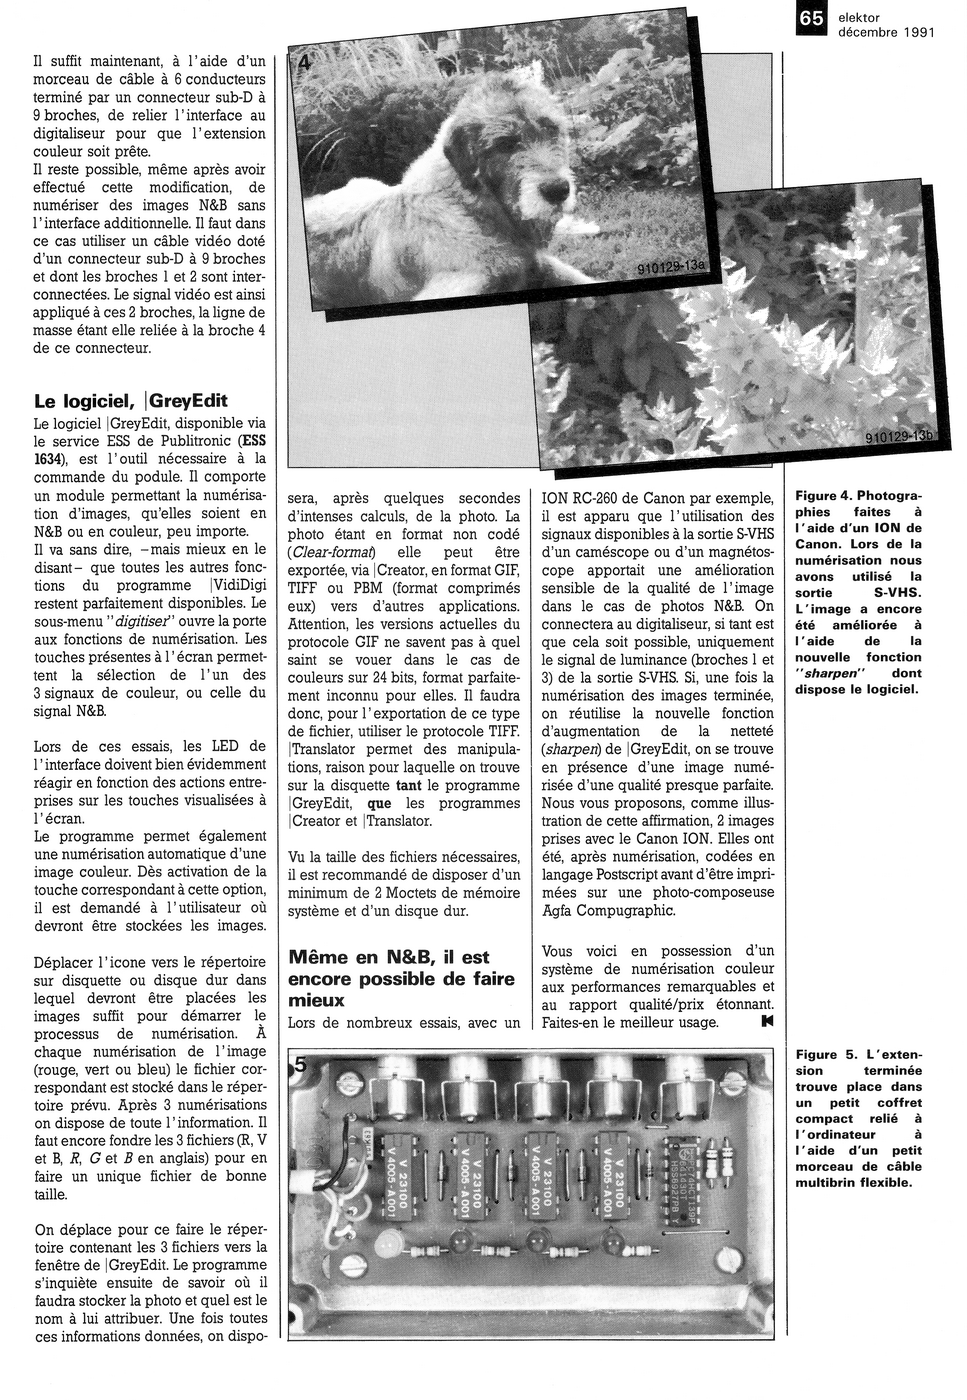 Article page 4/4 (click for magazine front)